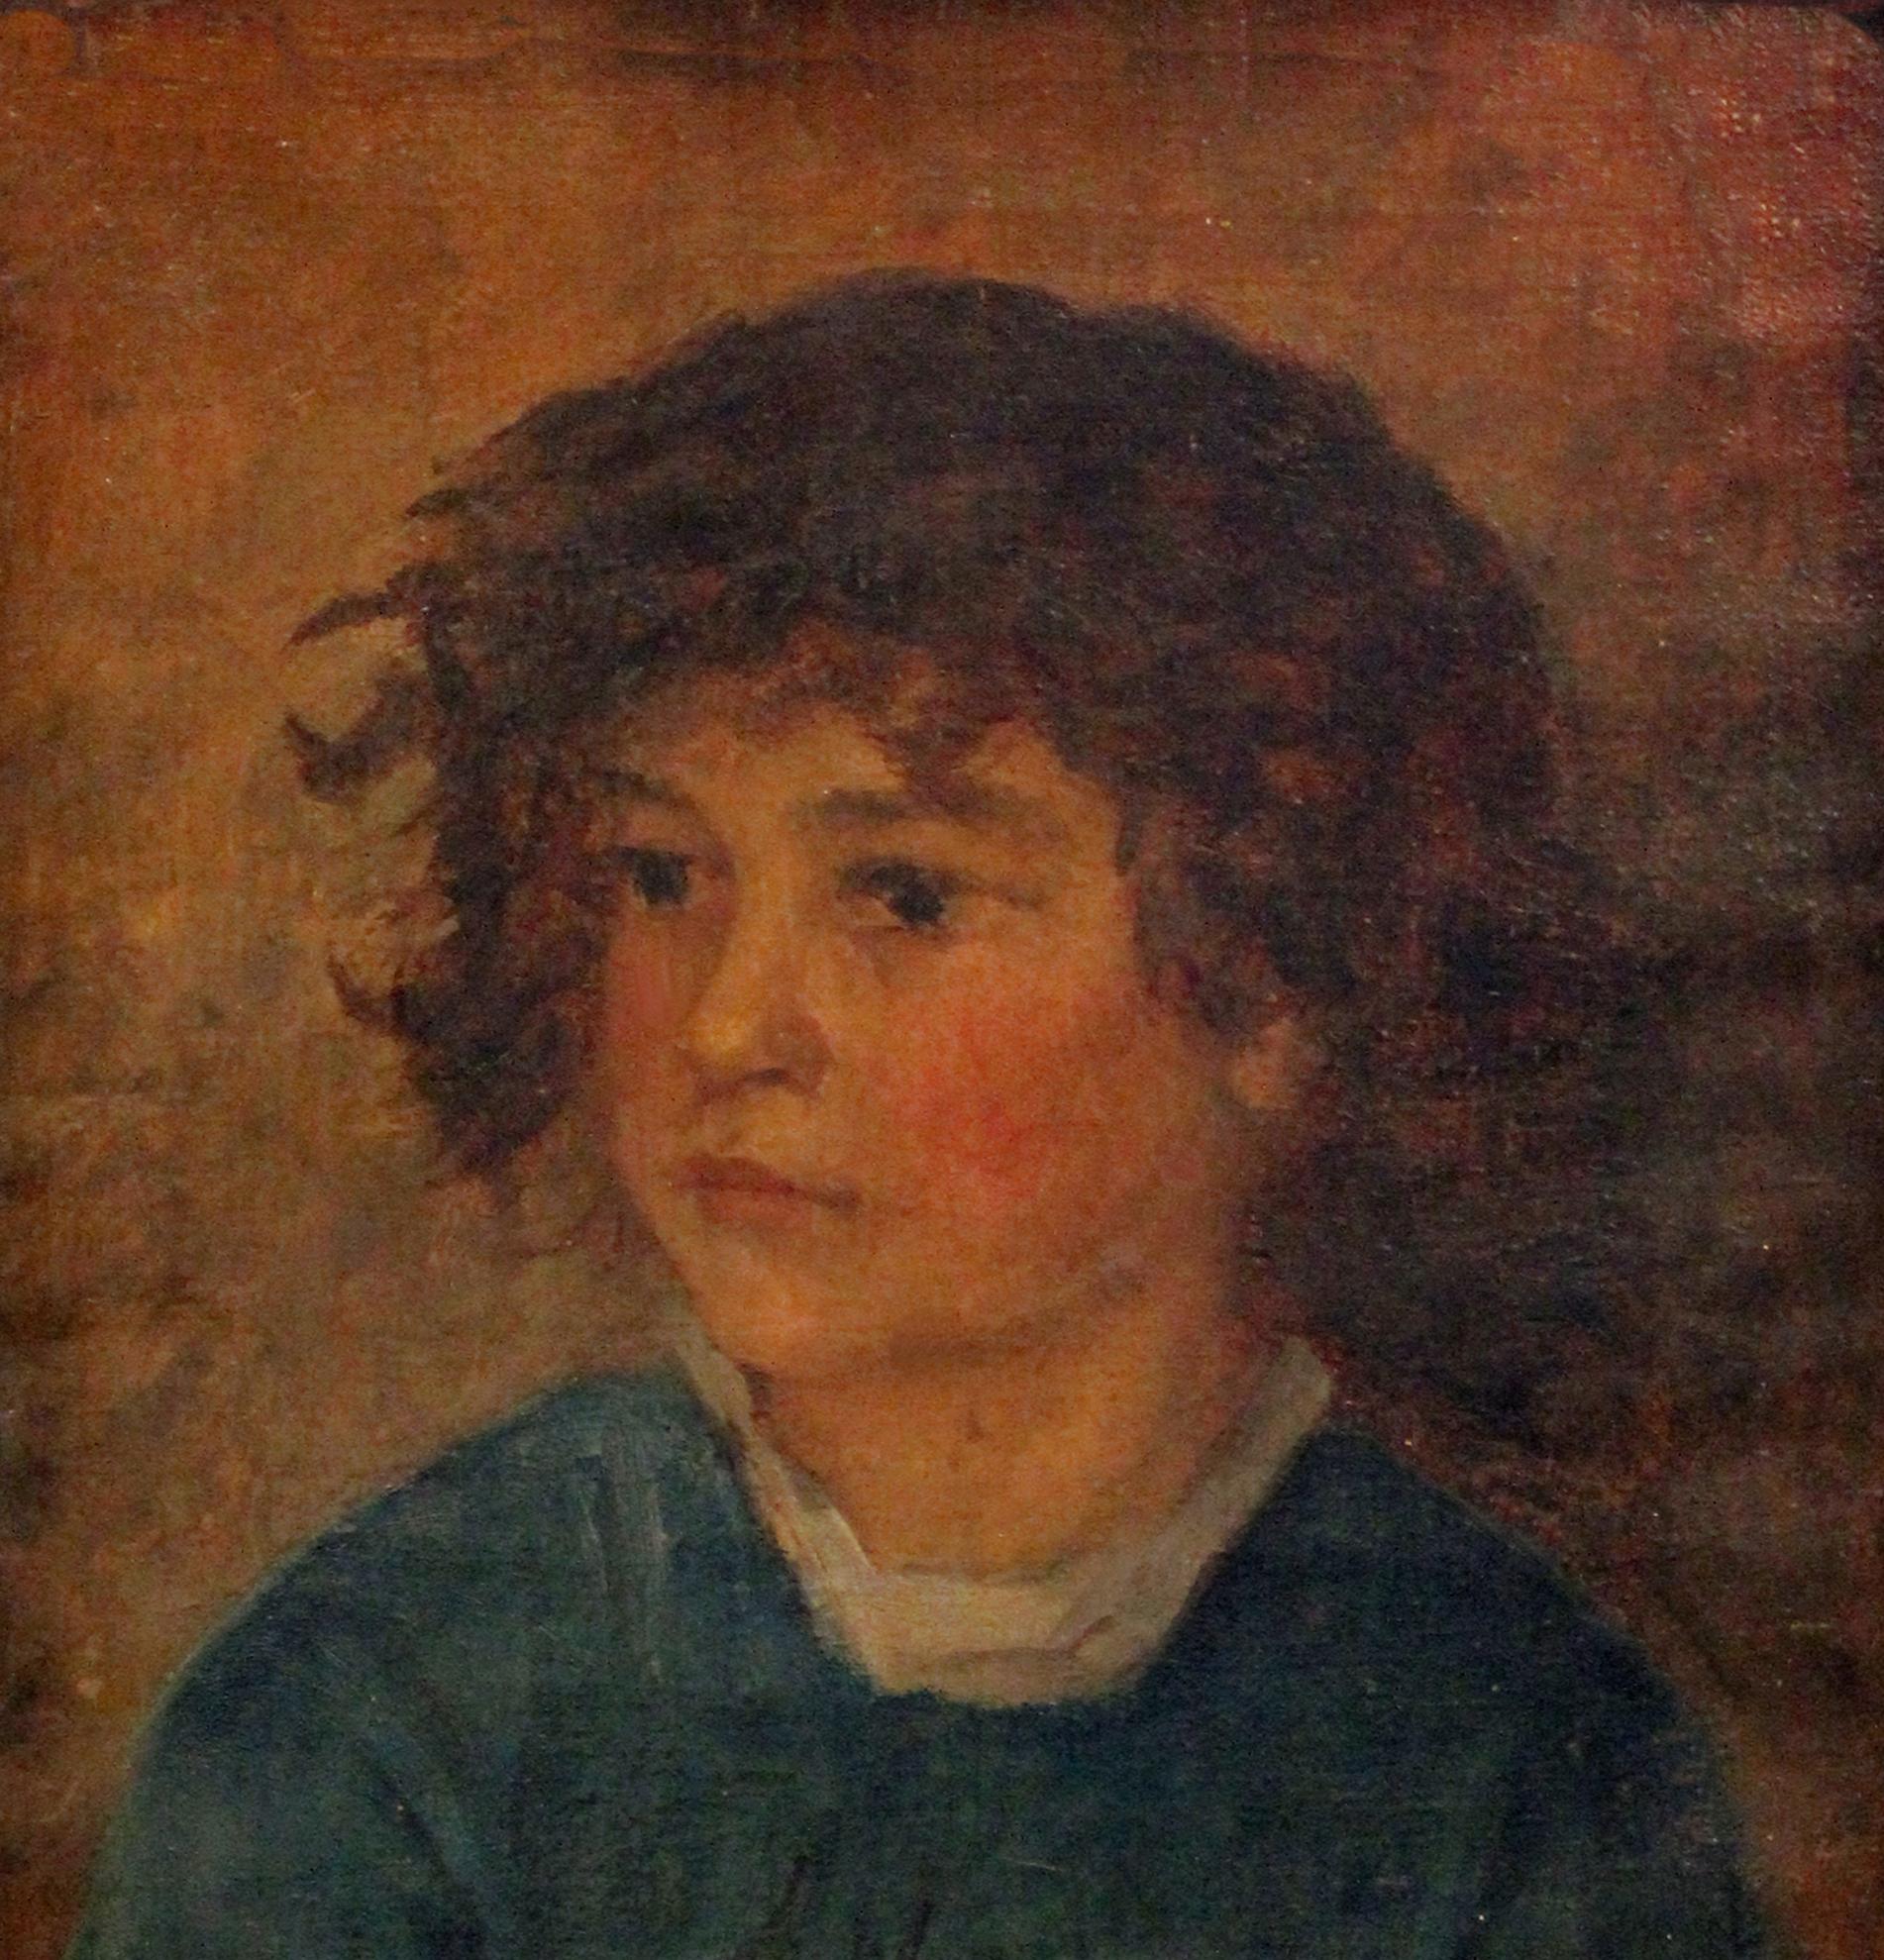 A beautiful portrait of a young boy with curly hair created in the late 19th Century.

This work comes housed in a beautiful ornate period frame which adds to the overall presentation.